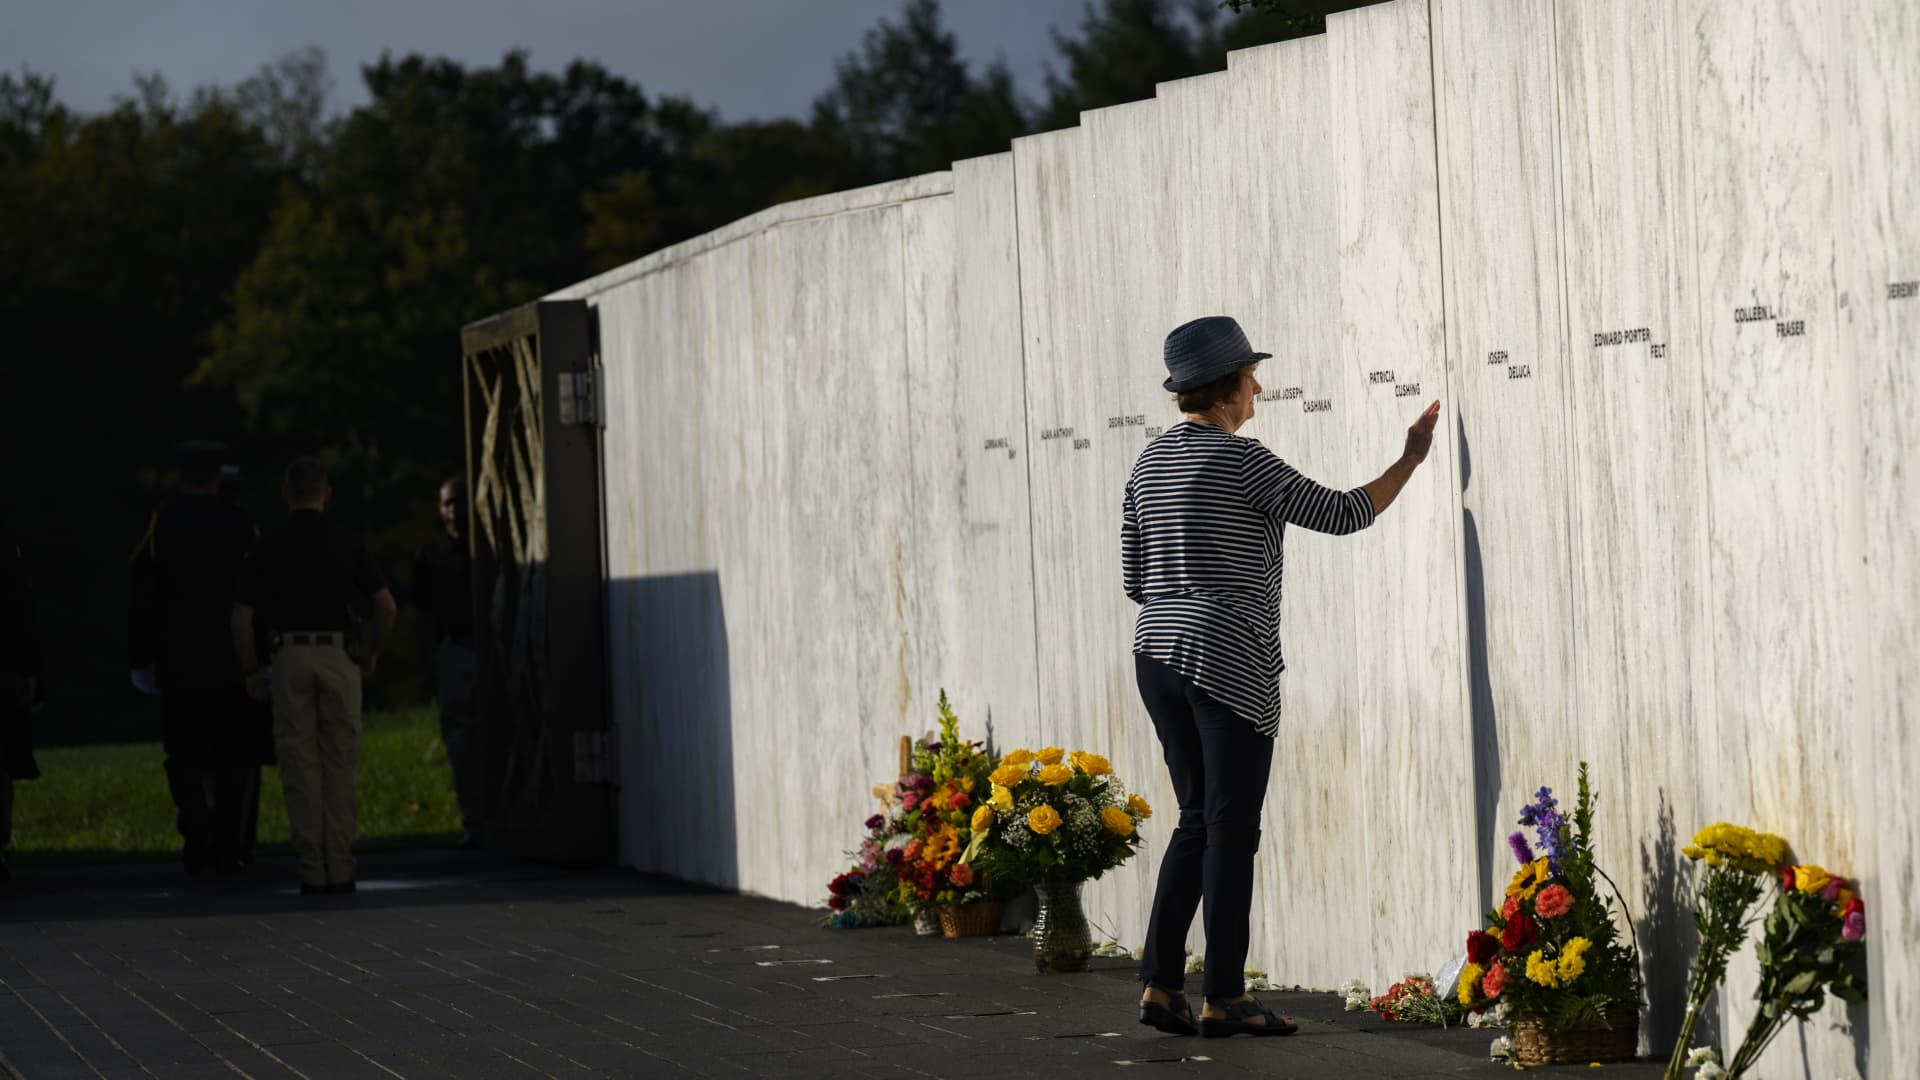 A relative of one of the victims pays her respects at the Wall of Names before a ceremony commemorating the 22nd anniversary of the crash of Flight 93 during the September 11, 2001 terrorist attacks at the Flight 93 National Memorial on September 11, 2023 in Shanksville, Pennsylvania. 